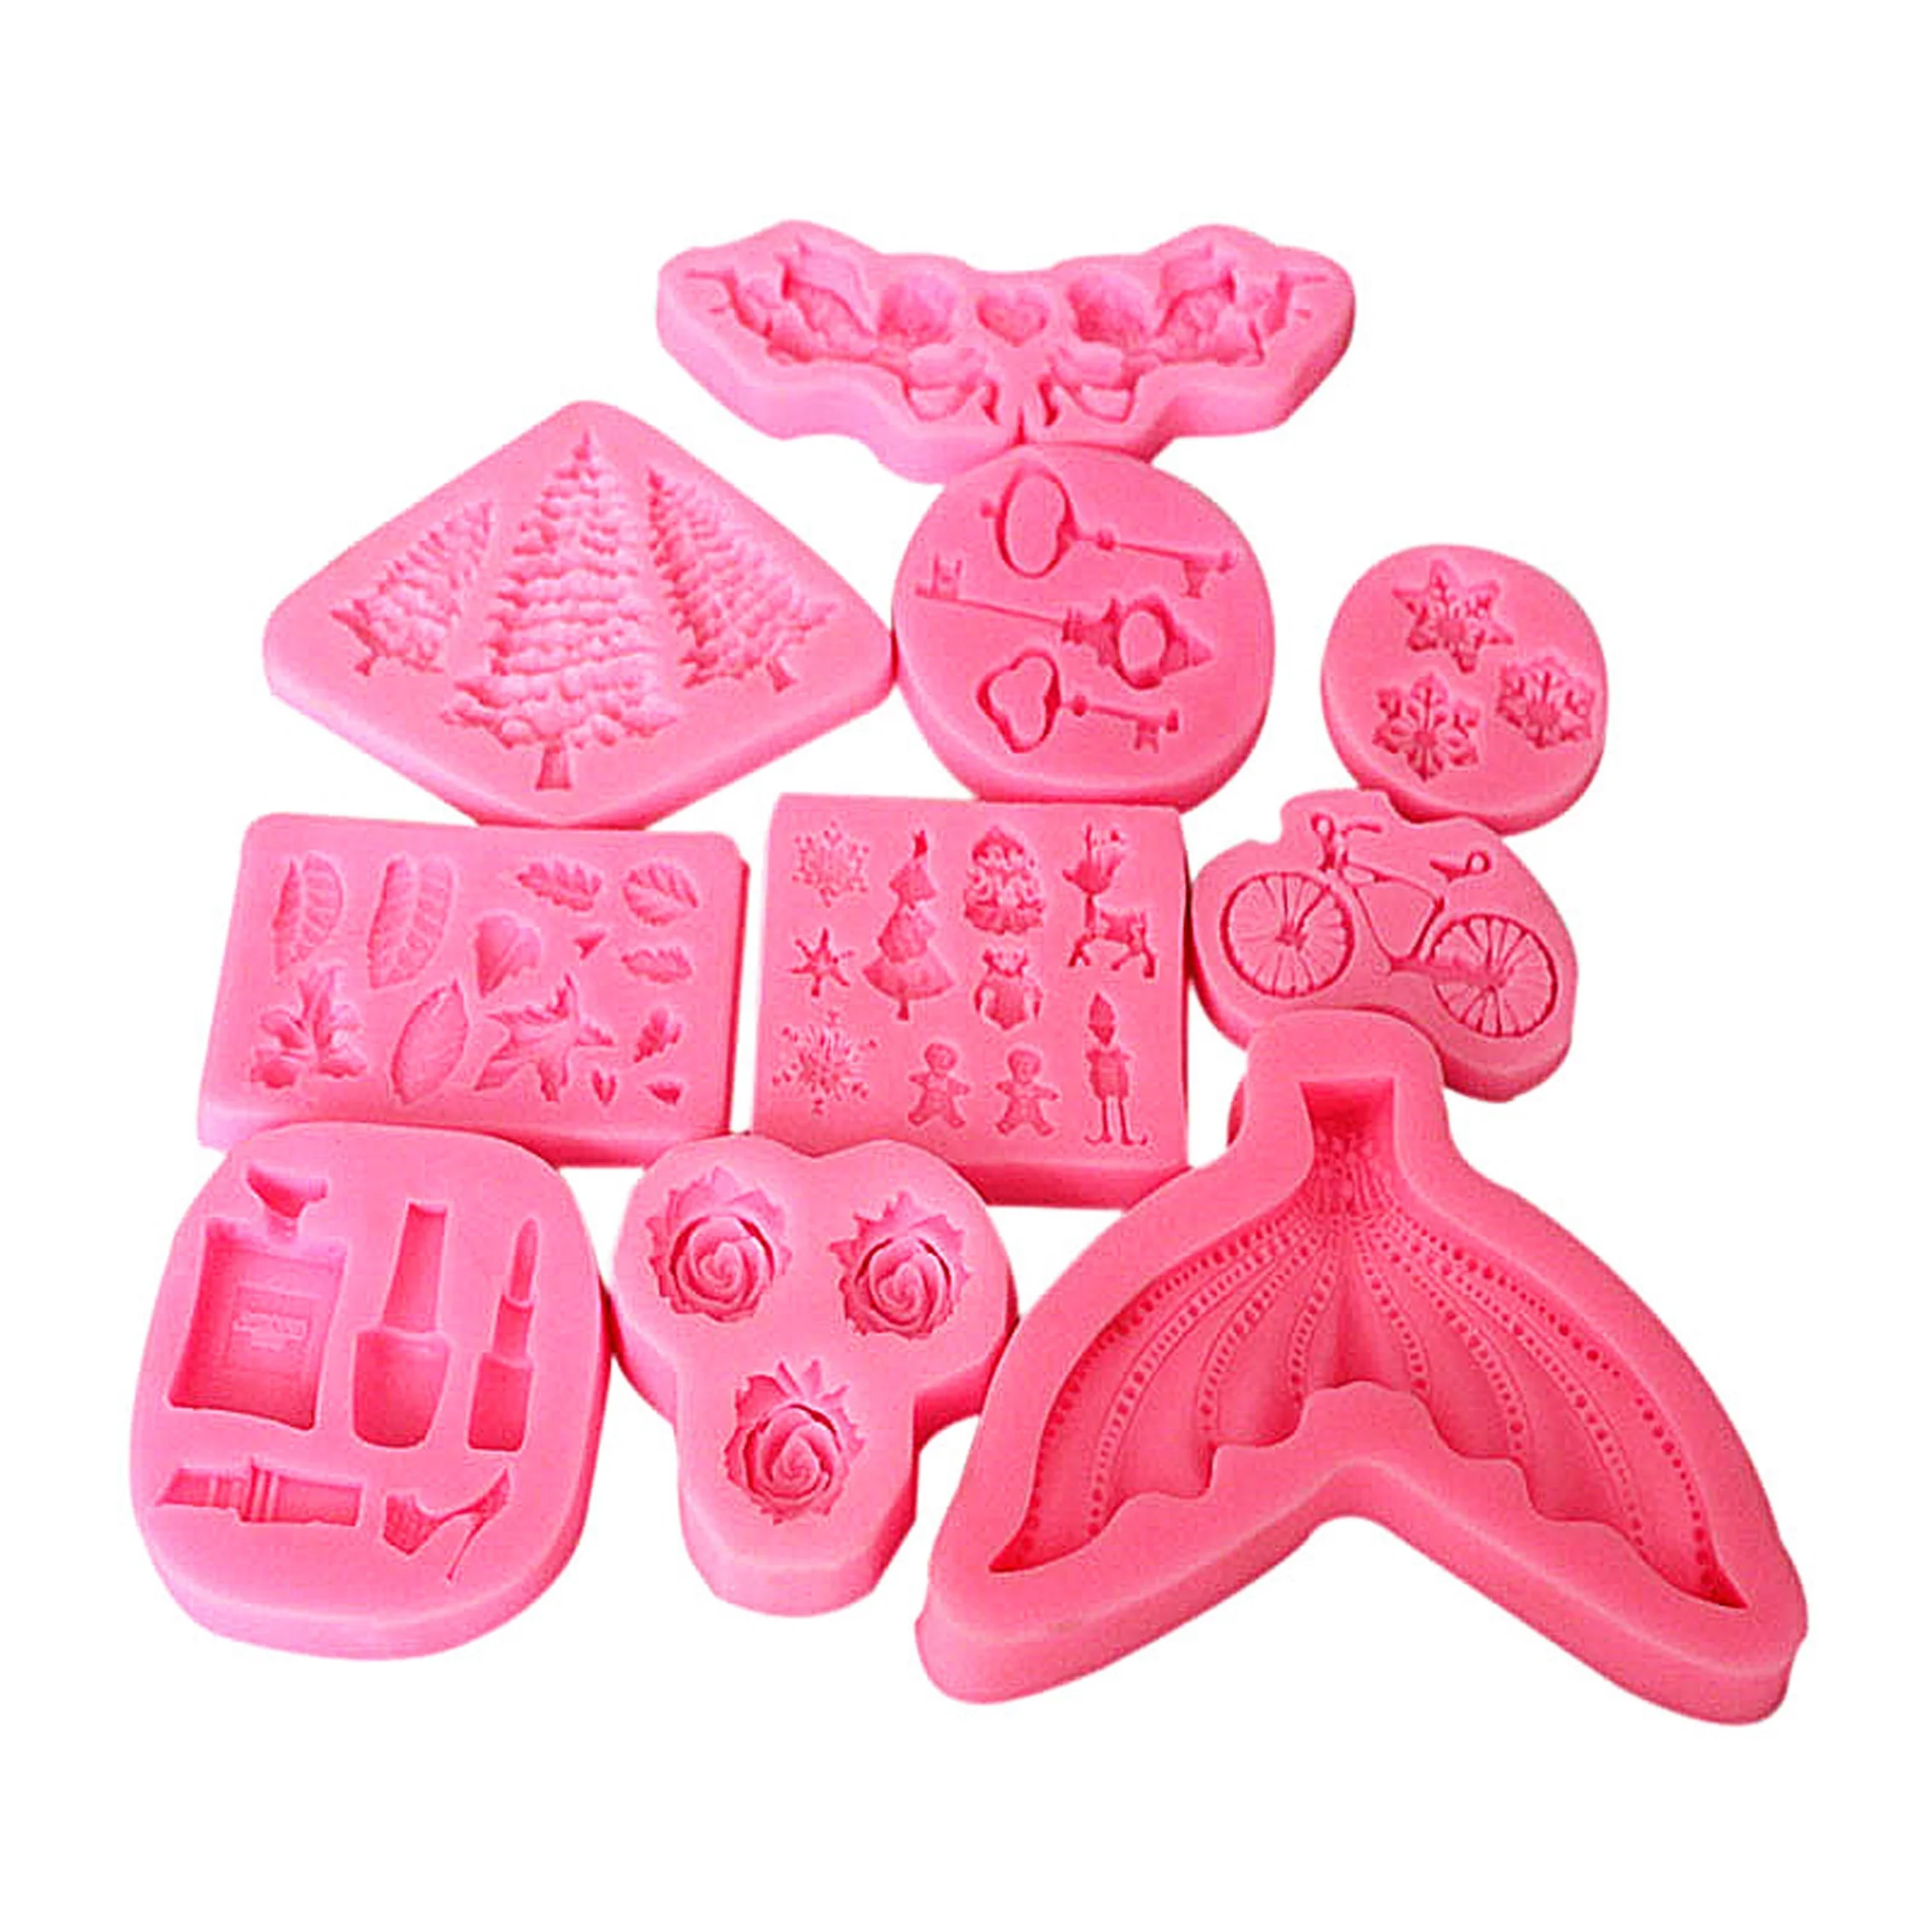 3D Fawn Elk Silicone Candle Mold Diy Christmas Topic Shaped Aromatherapy Cake Decoration Mold For Christmas Party Tools